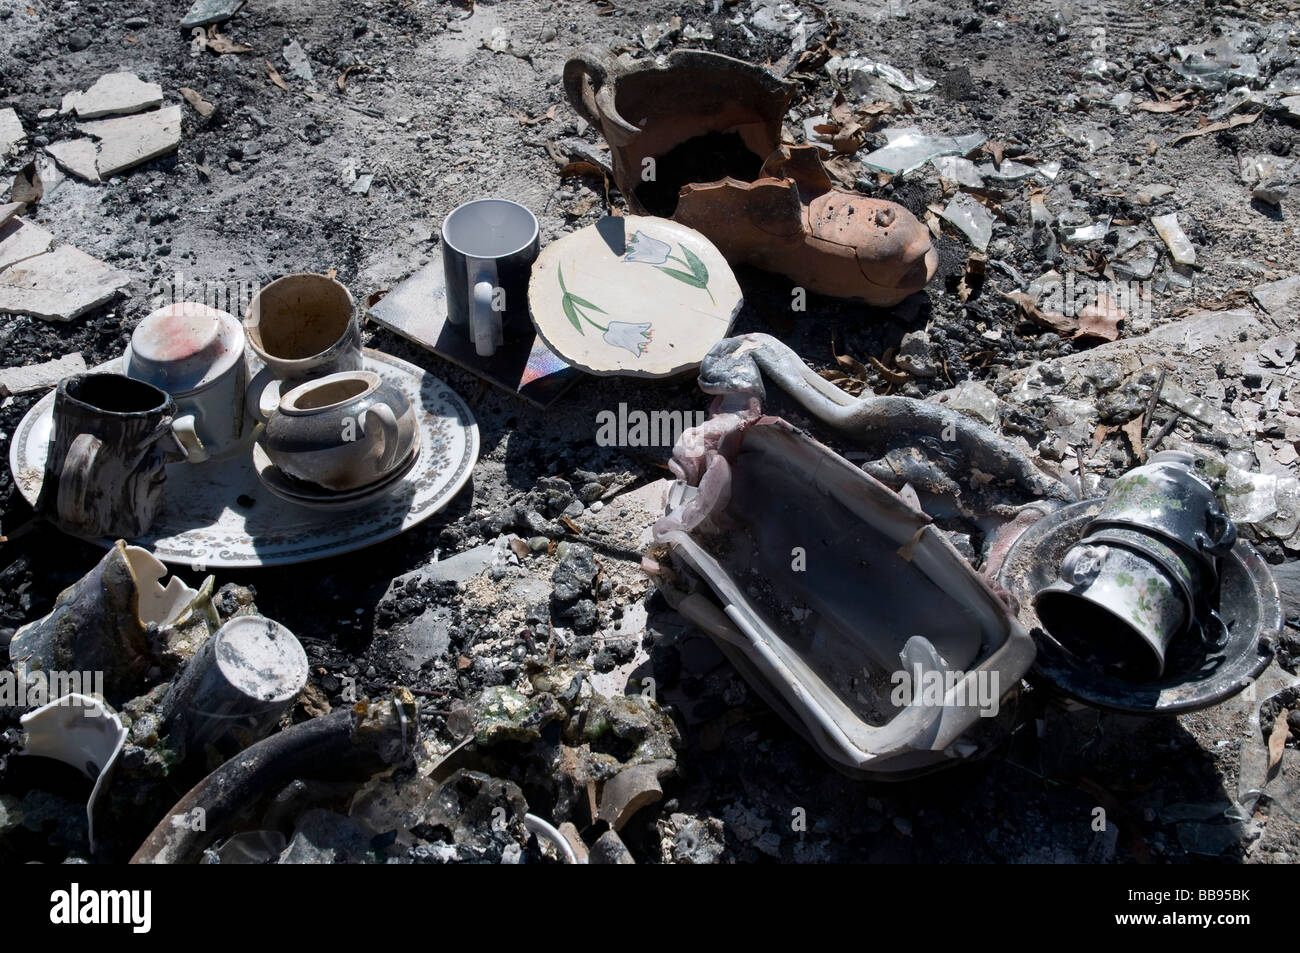 Remains of household objects after a devastating bushfire Stock Photo